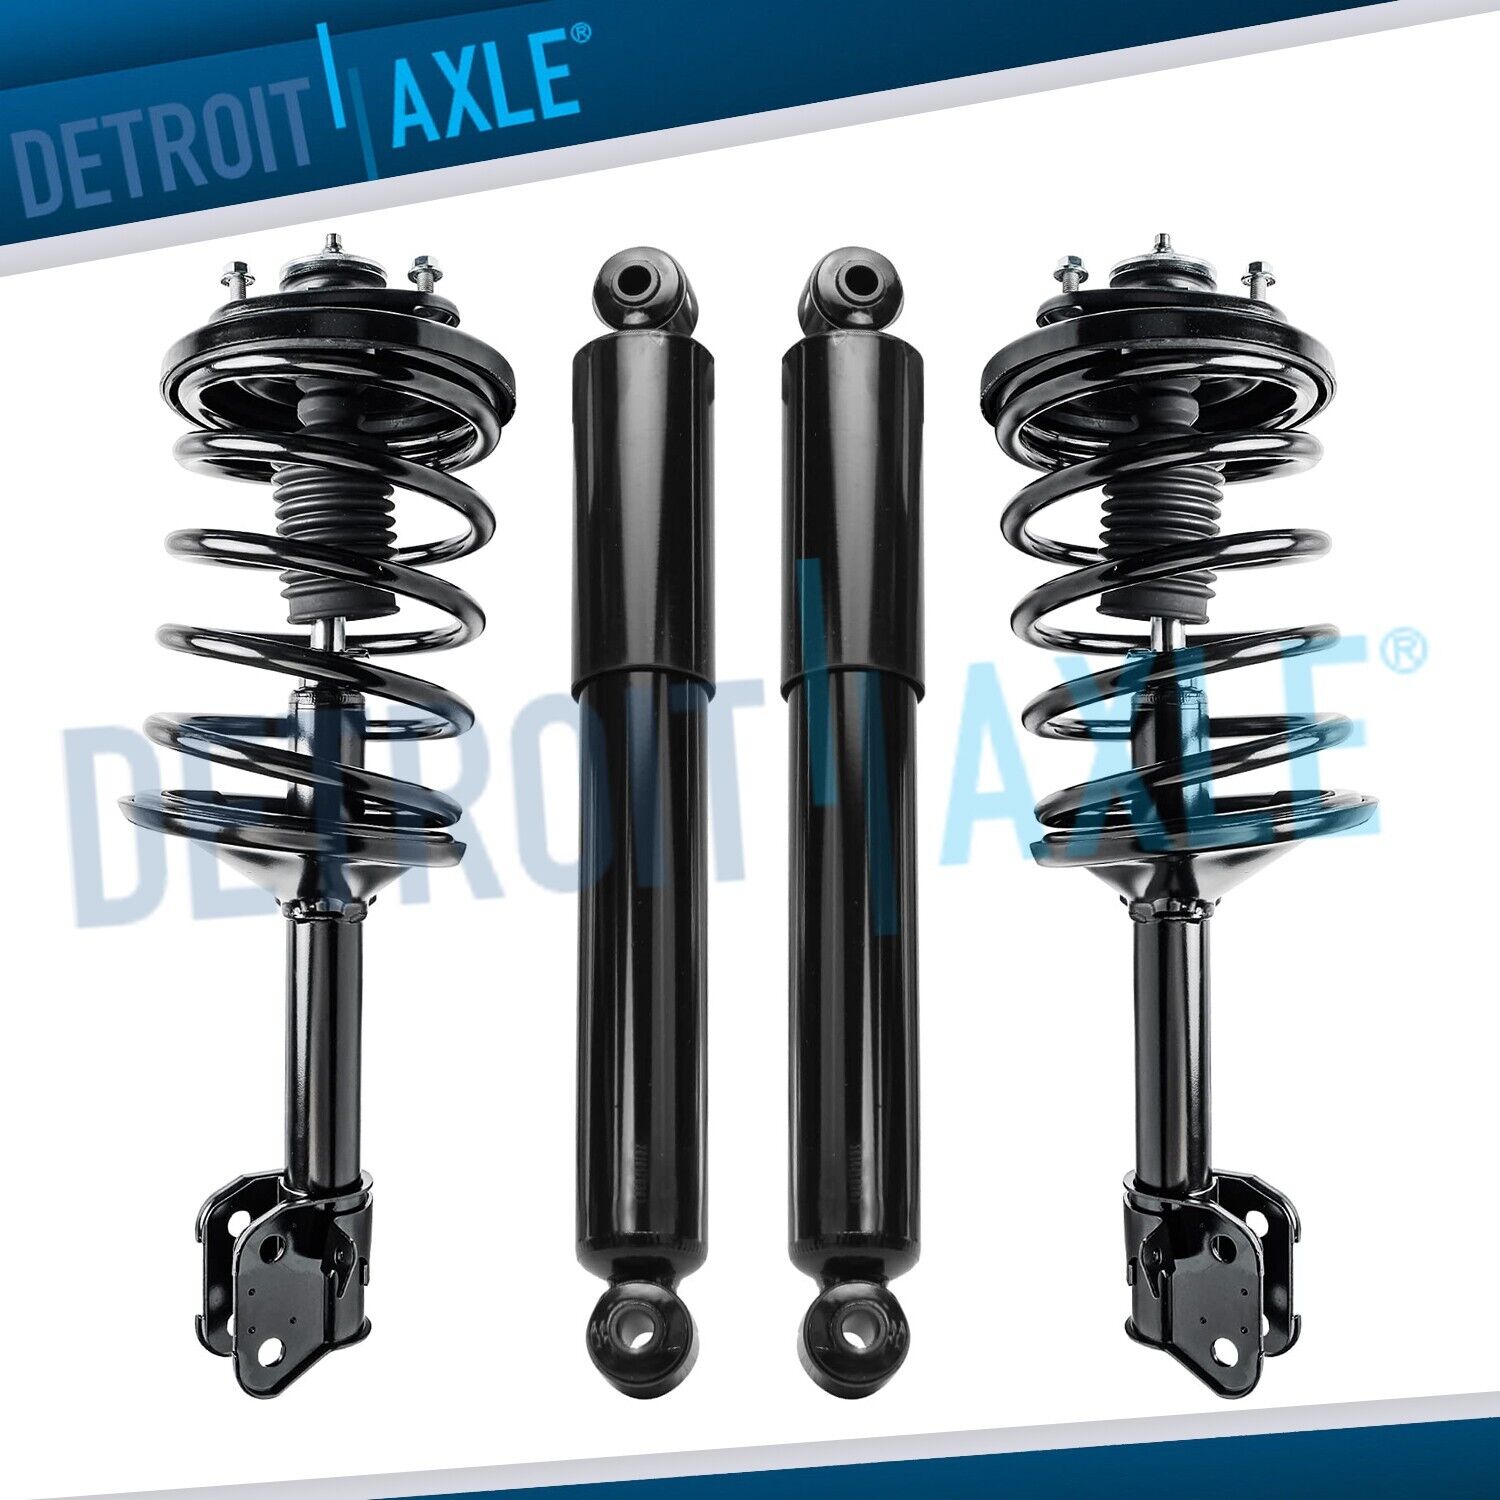 AWDFront Struts with Coil Spring Rear Shock Absorbers for Honda Pilot Acura MDX